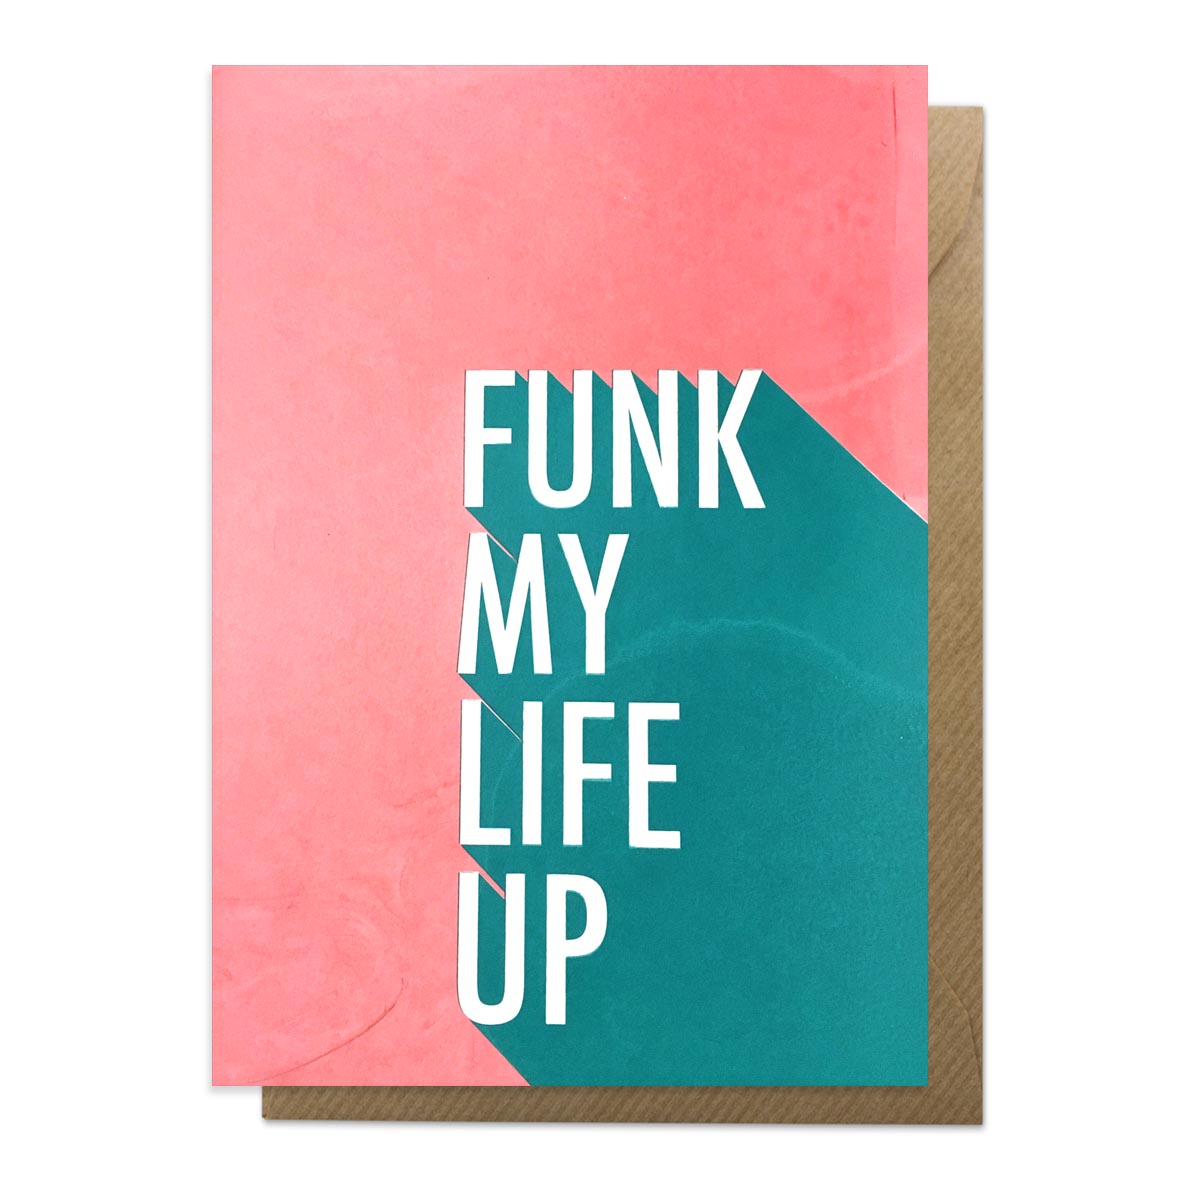 Funk my life up card